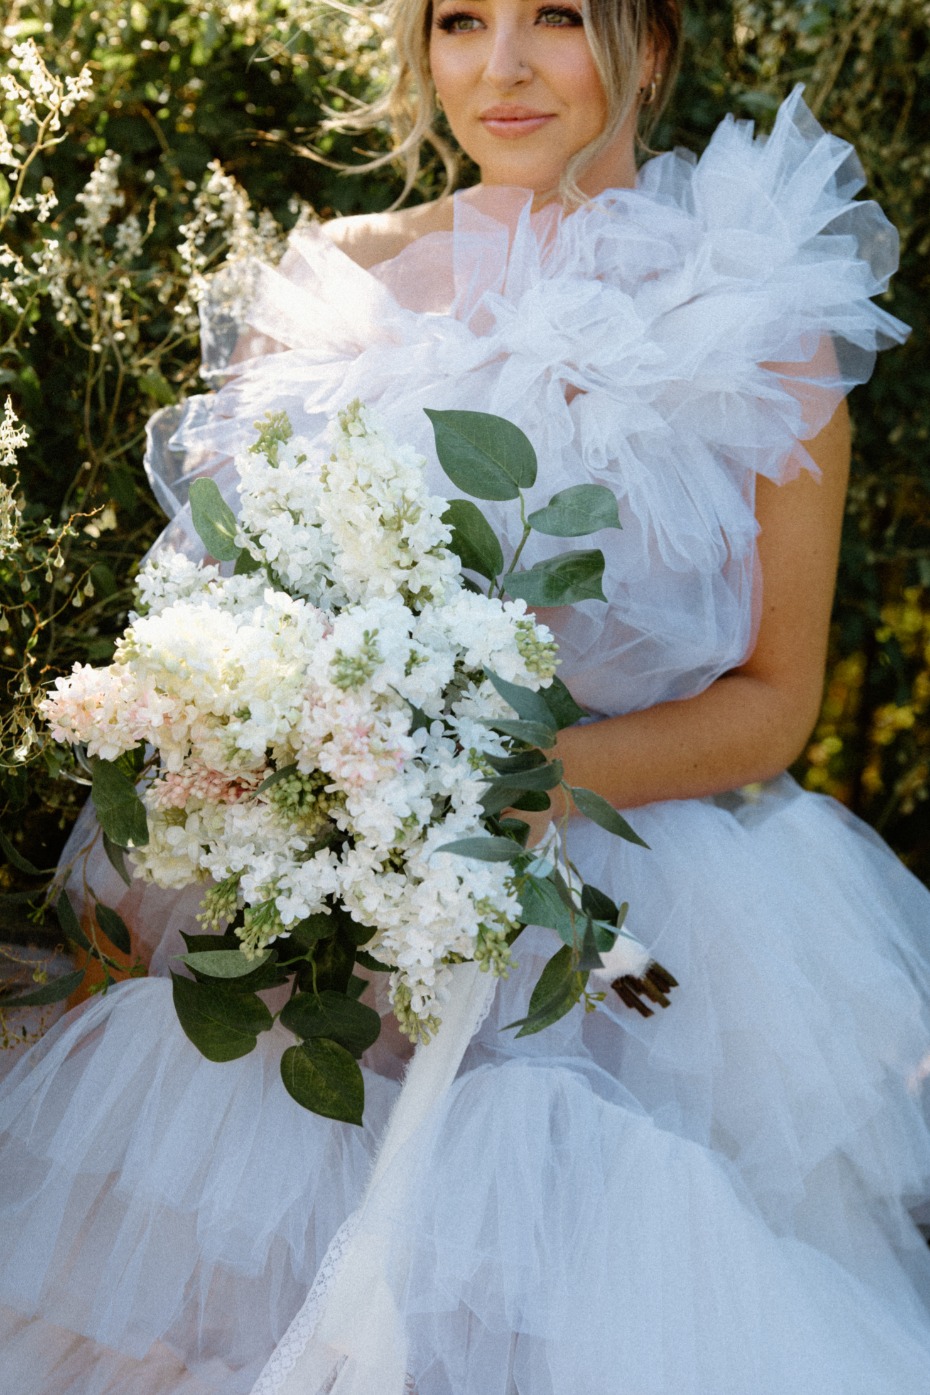 This Simple Bouquet DIY From Afloral Will Stun At Your Classic Wedding